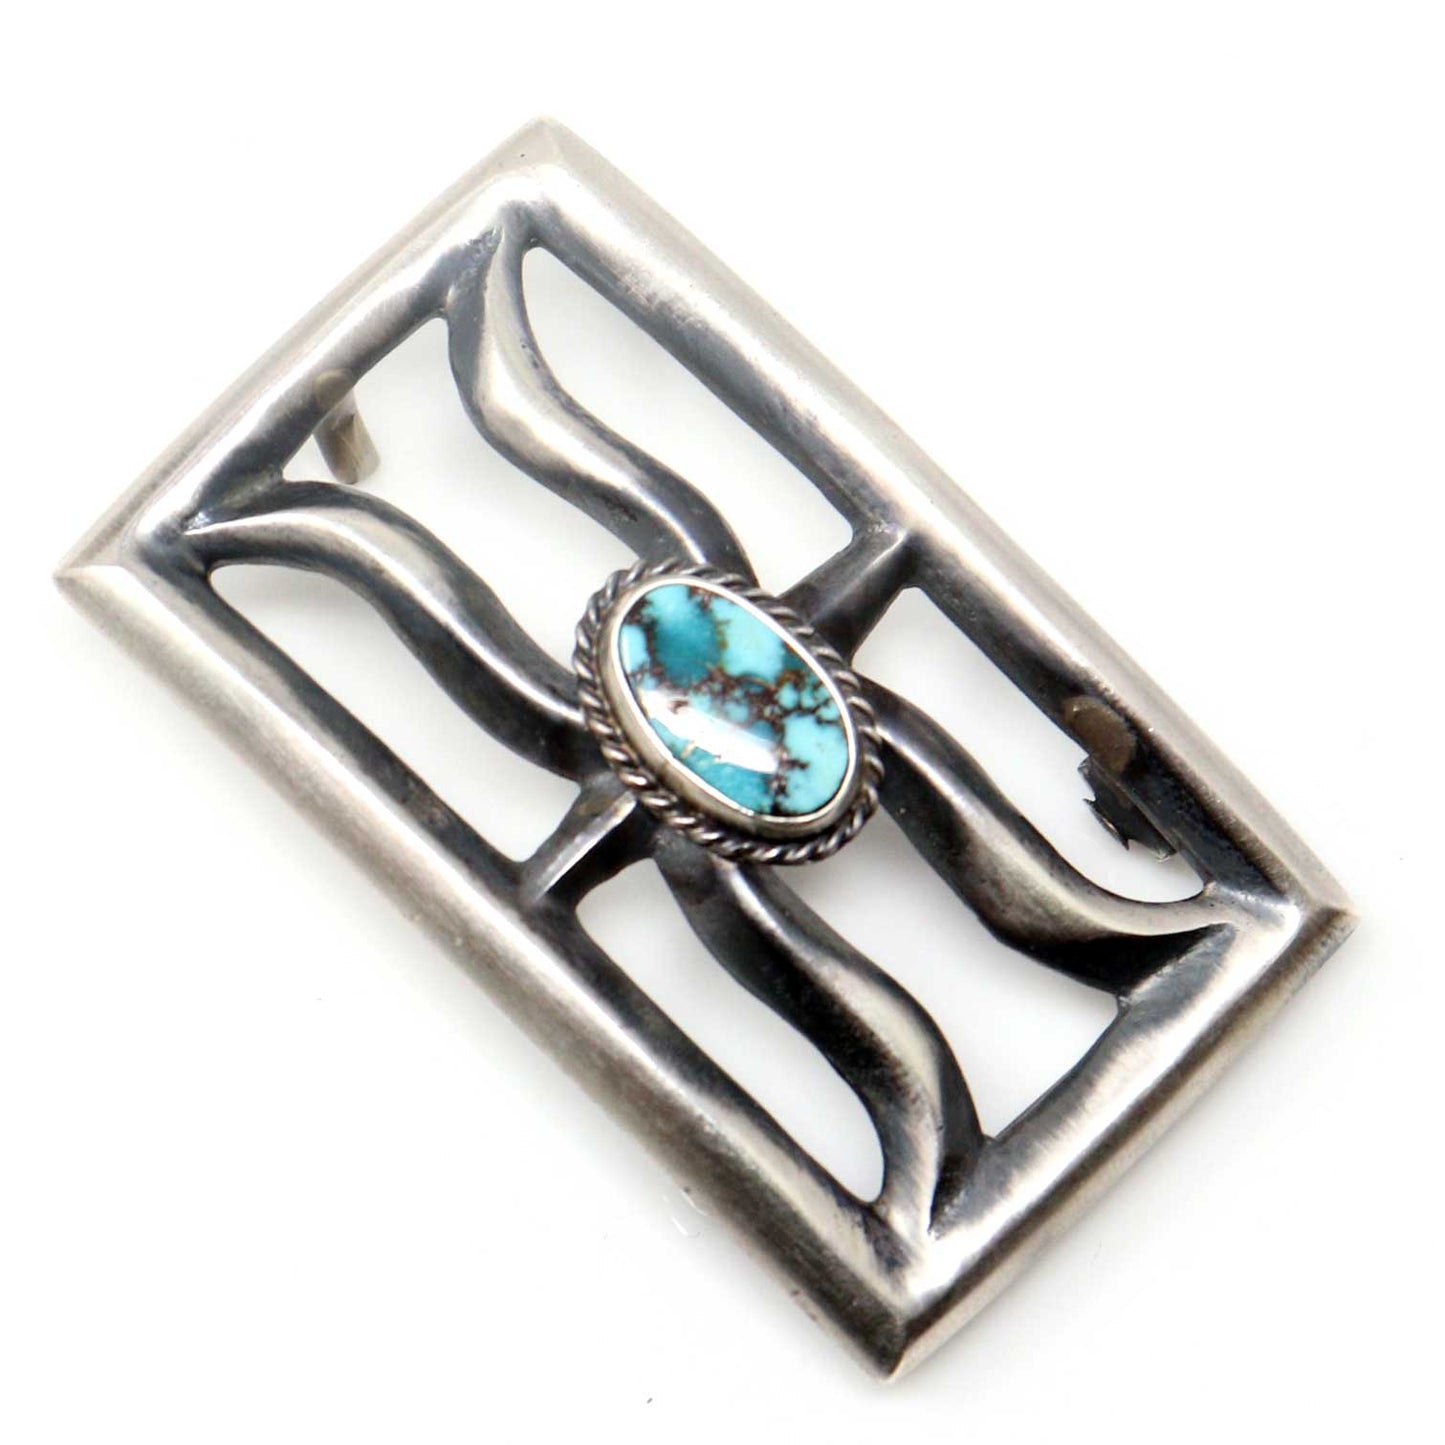 Turquoise & Silver Cast Buckle by Bitsui